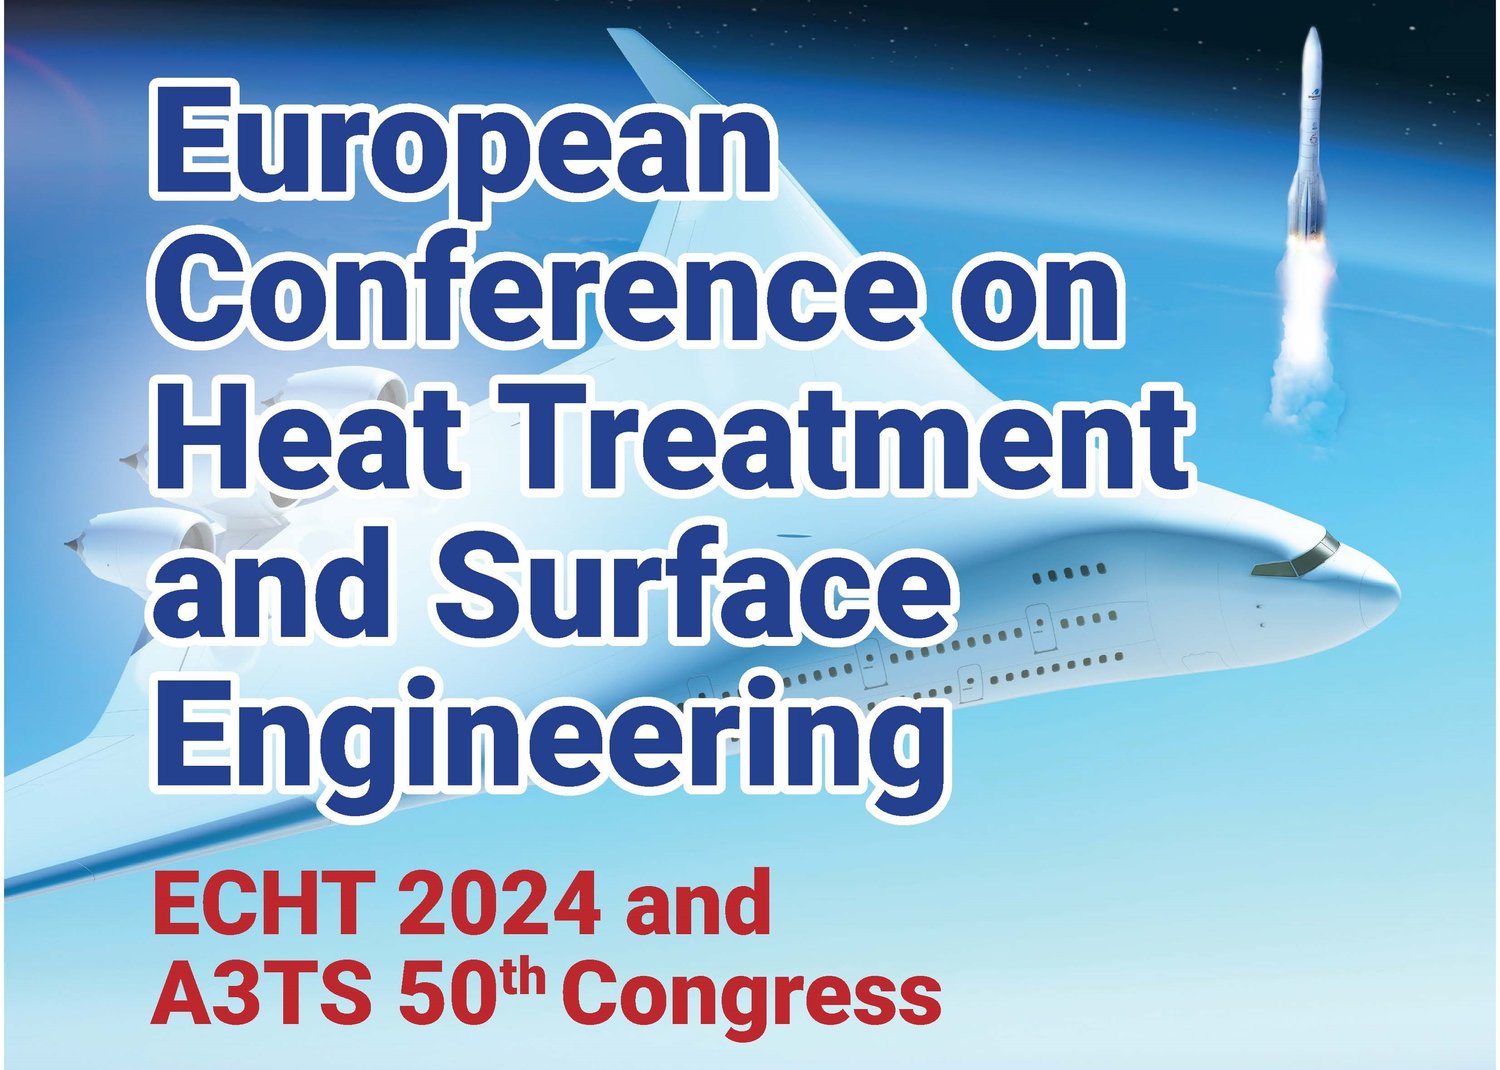 European Conference on Heat Treatment and Surface Engineering – ECHT 2024 and A3TS 50th Congress